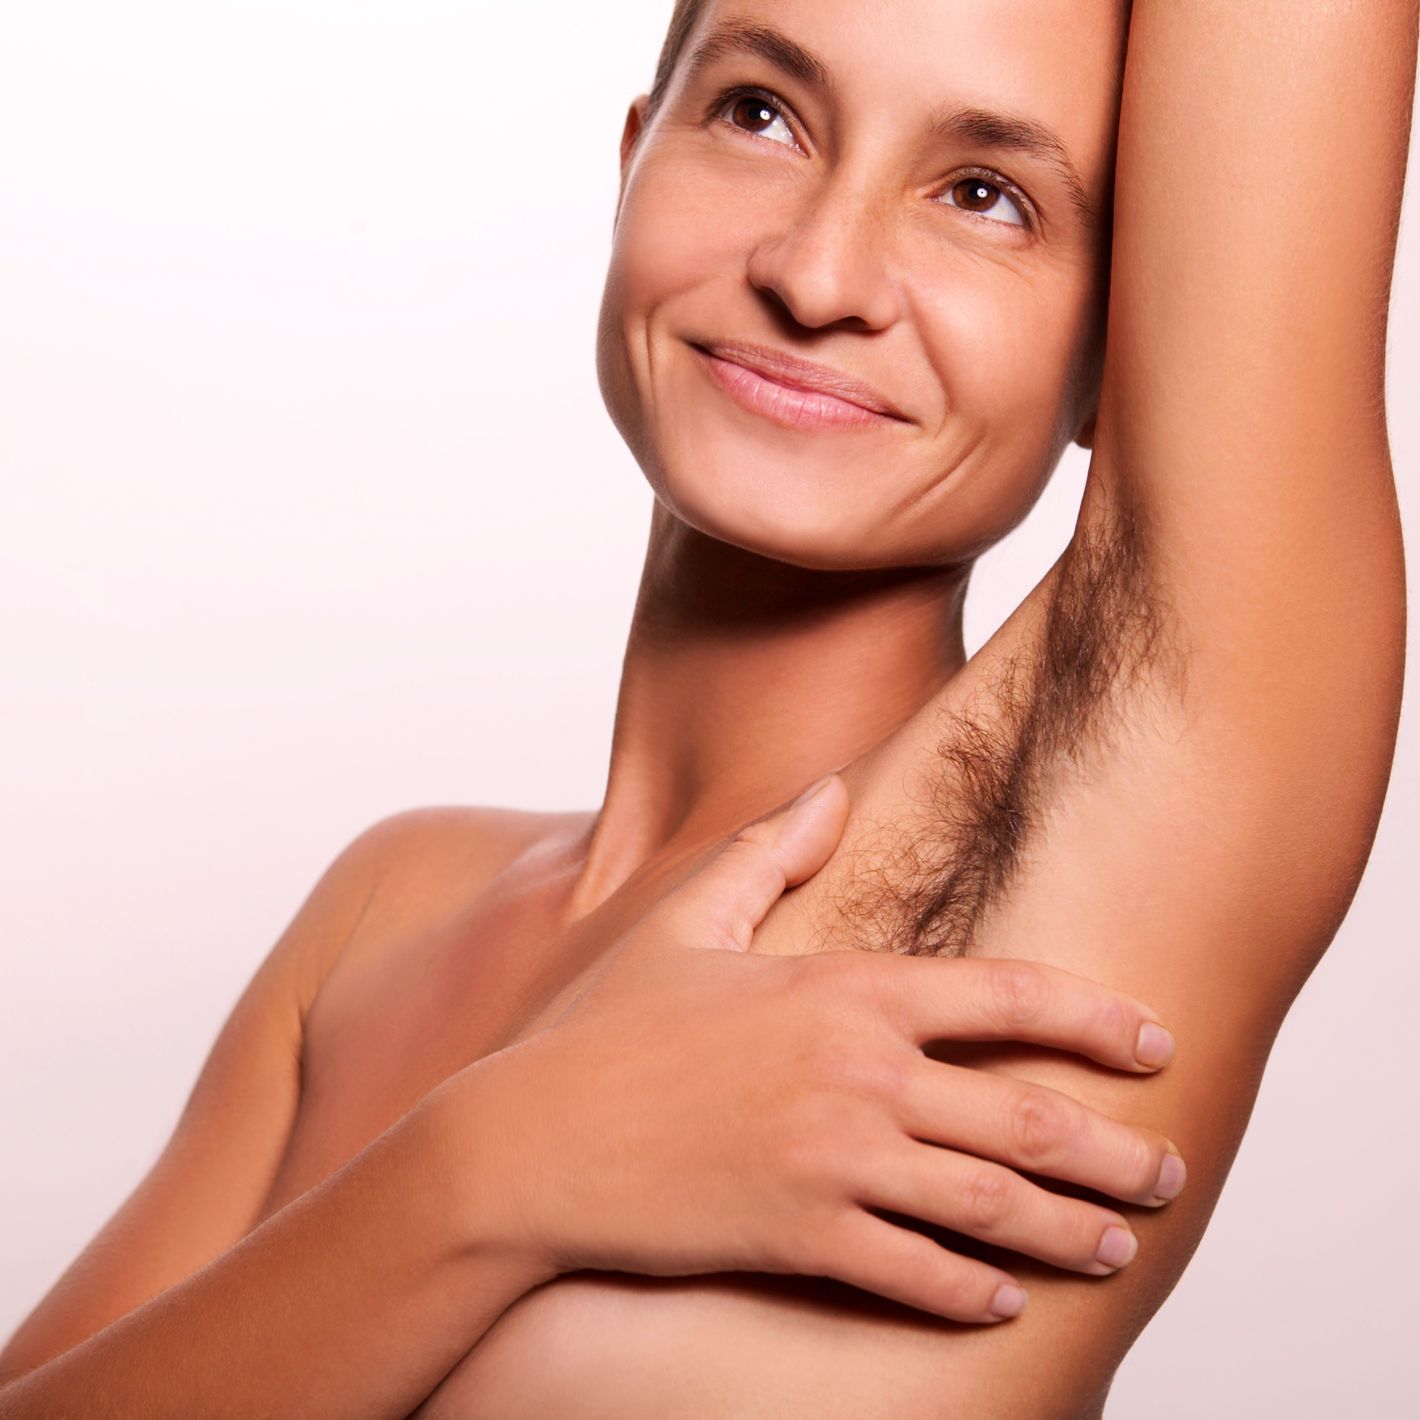 Why Are We Grossed Out By Women With Armpit Hair